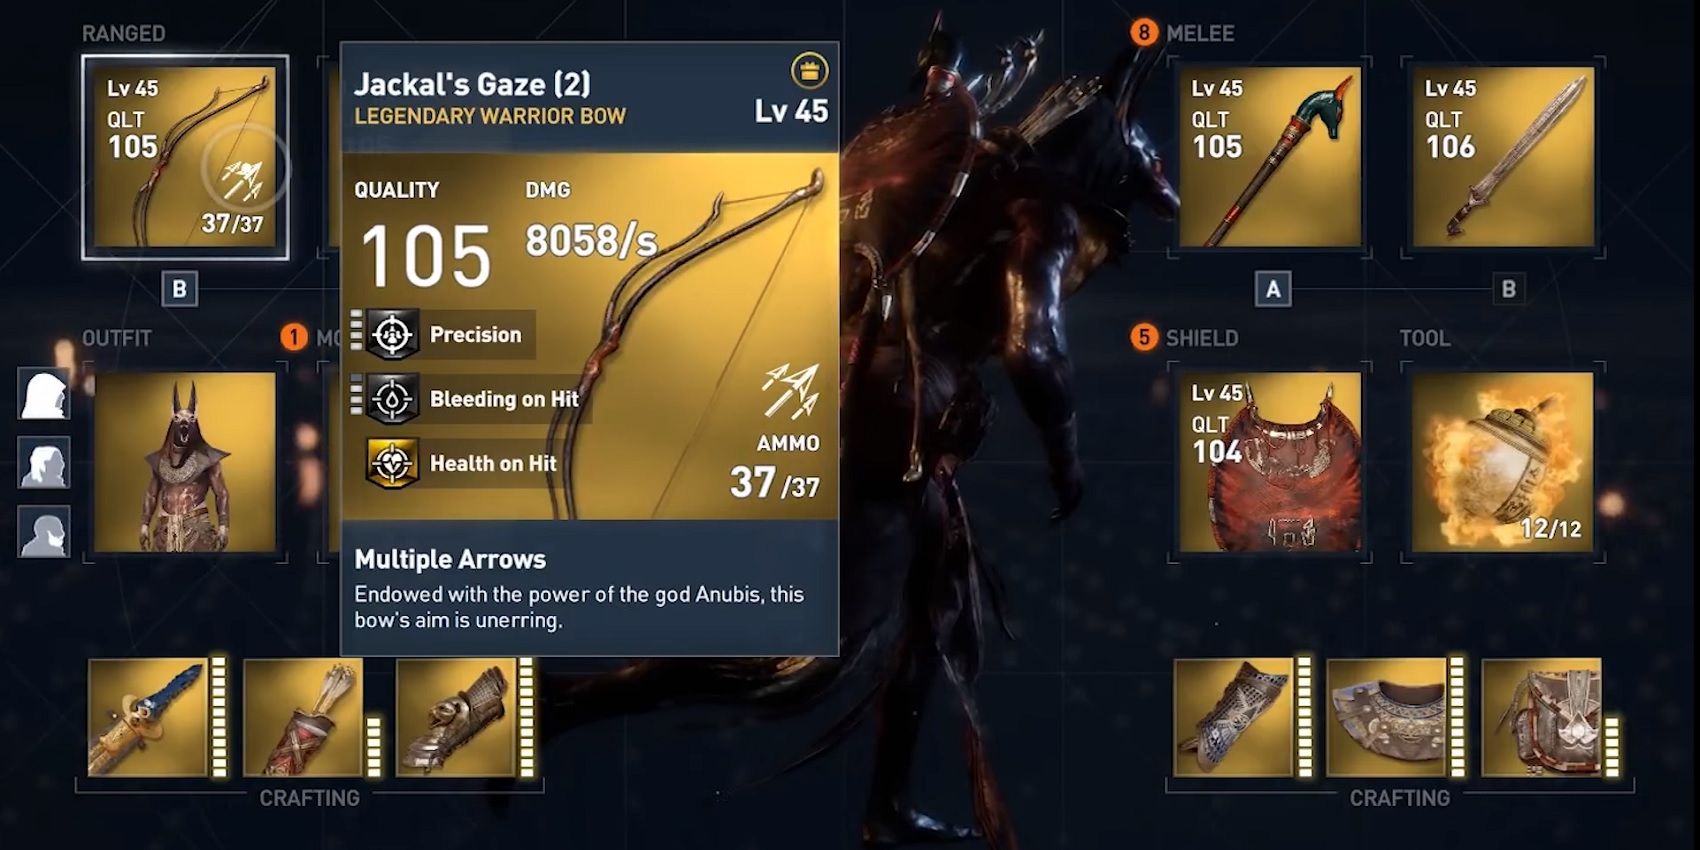 The Jackal's Gaze inventory page with stats